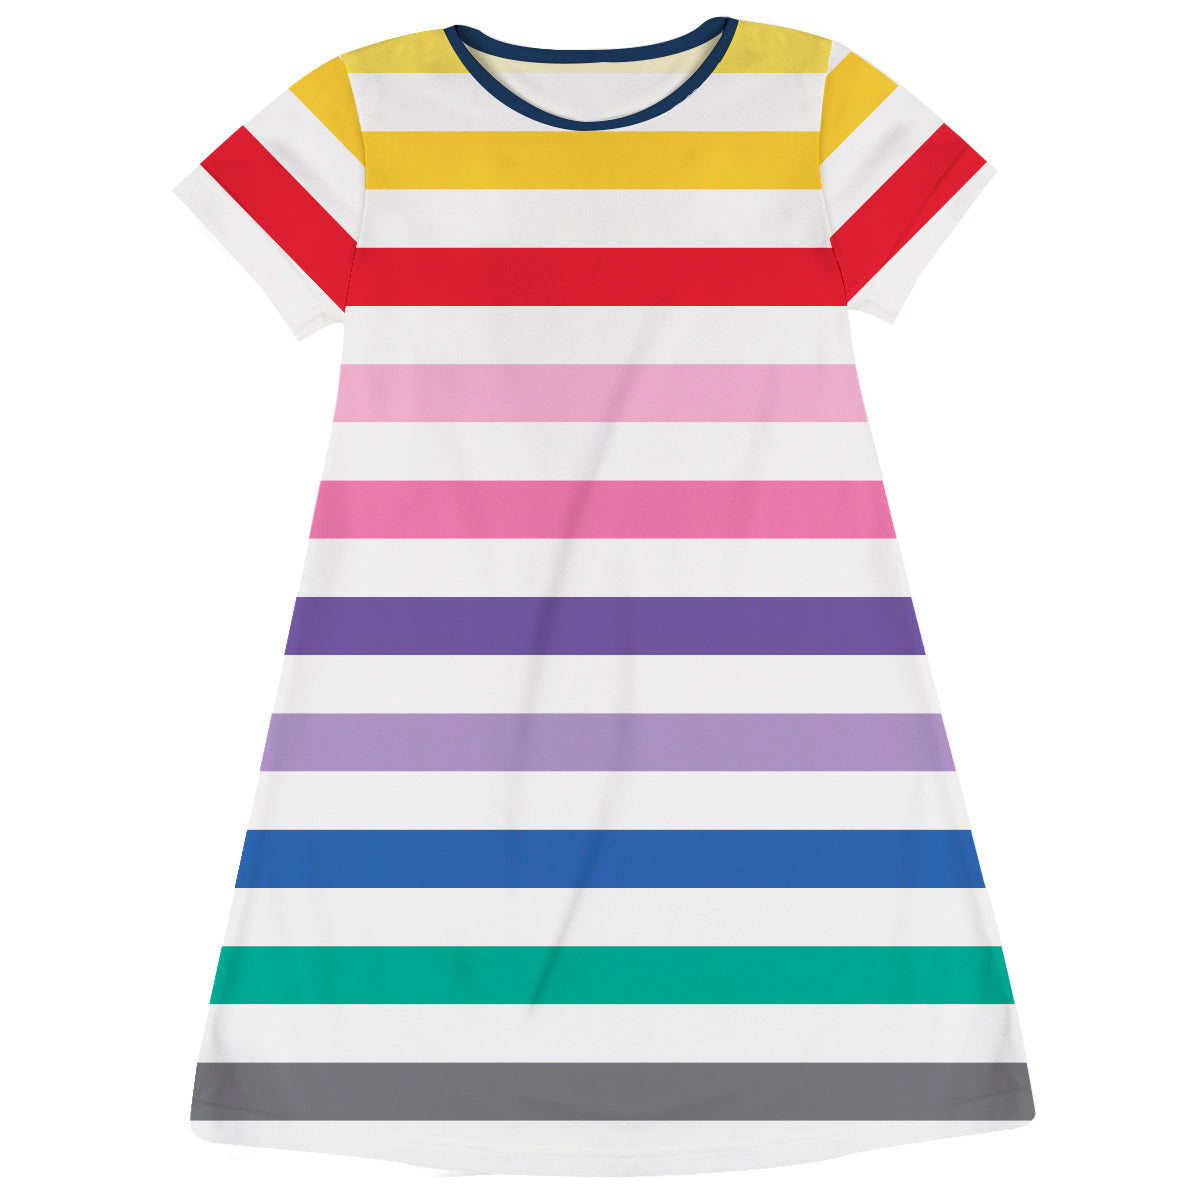 Stripes Print White Yellow and Red Short Sleeve A Line Dress